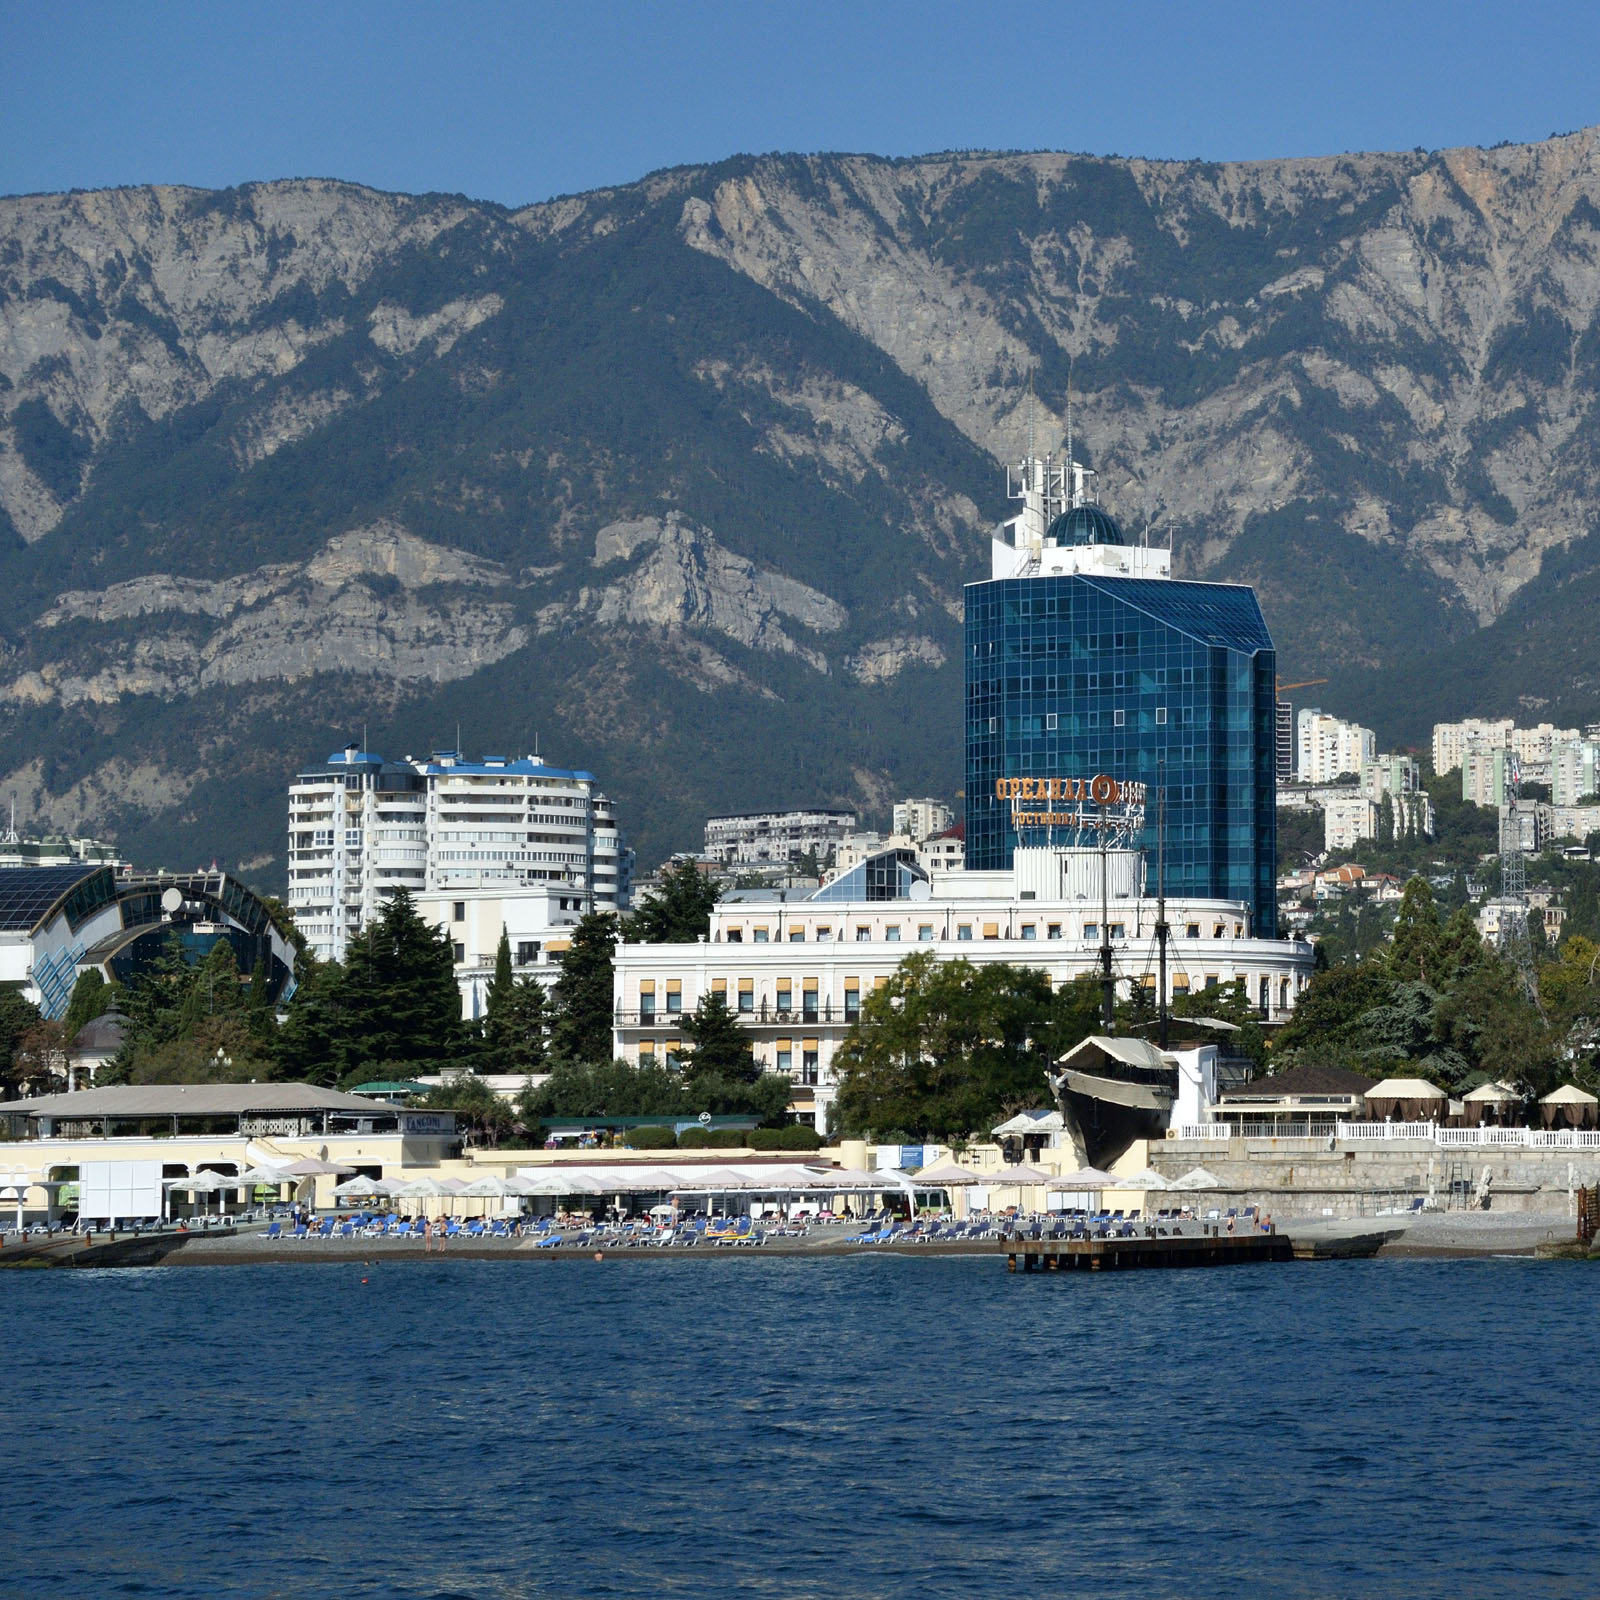 Russia to “Tame and Test” Crypto Technologies in Crimea